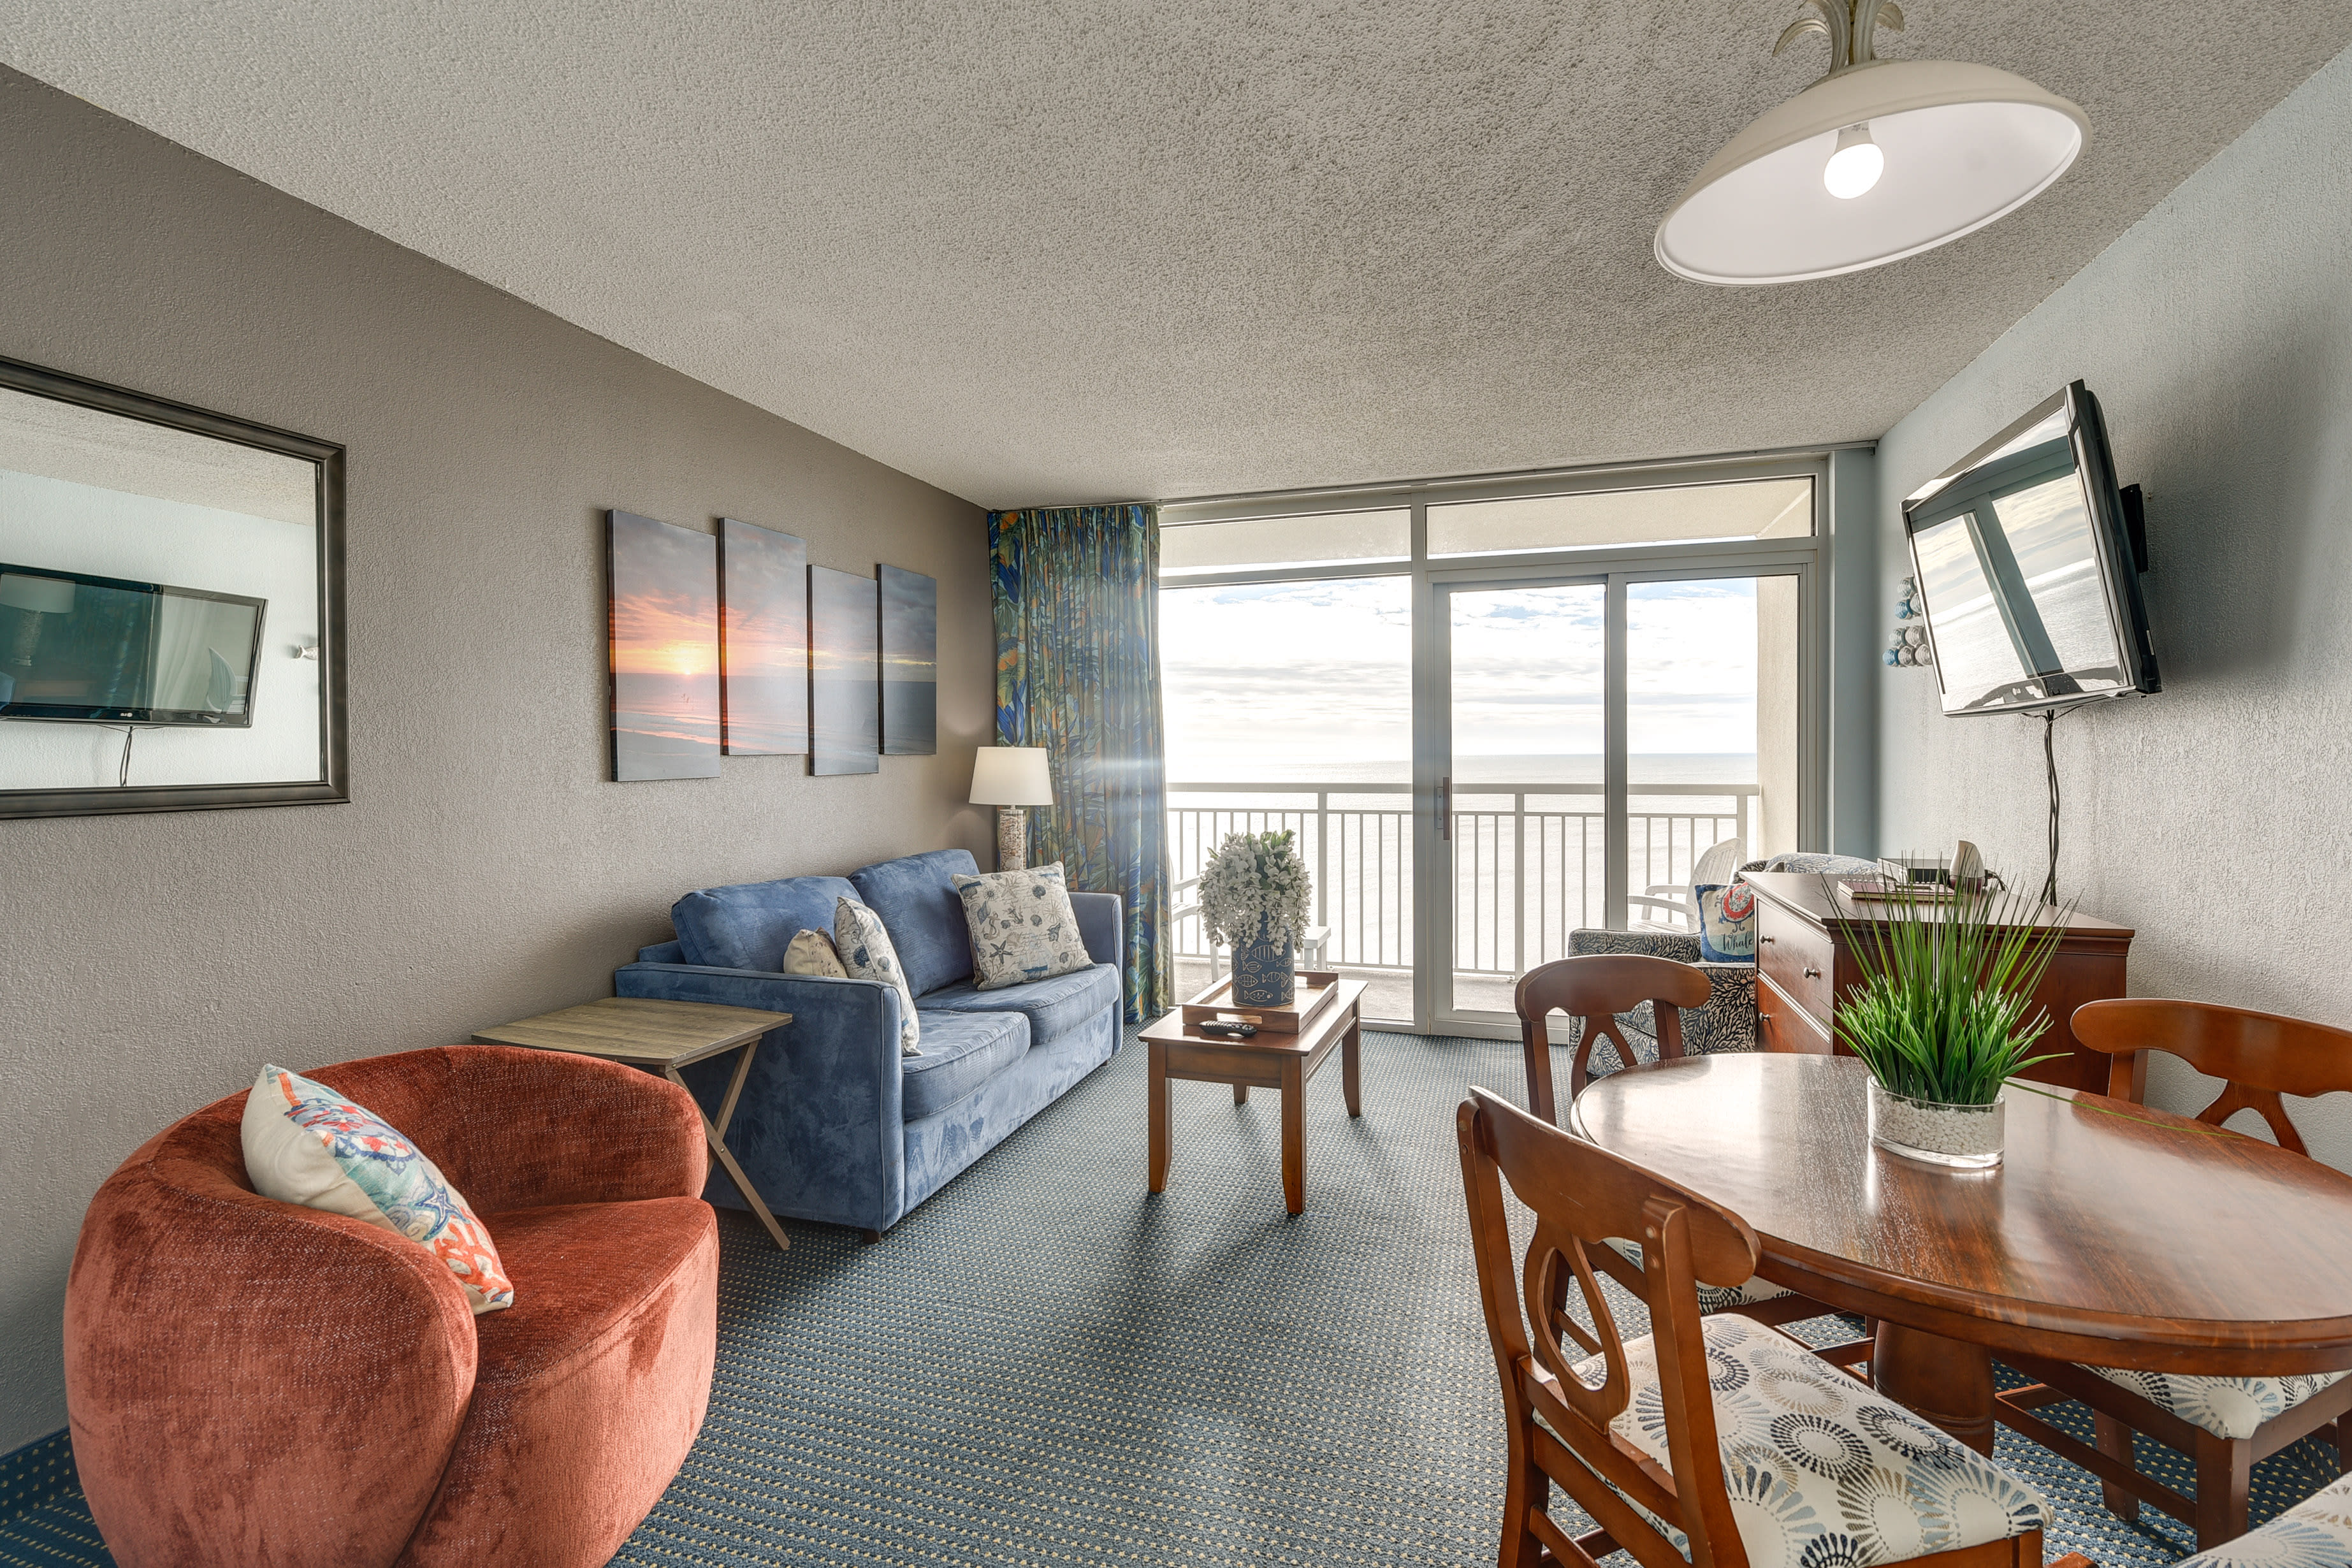 Living Room | Amenity Wristbands Provided | Elevator Access | Coin Laundry